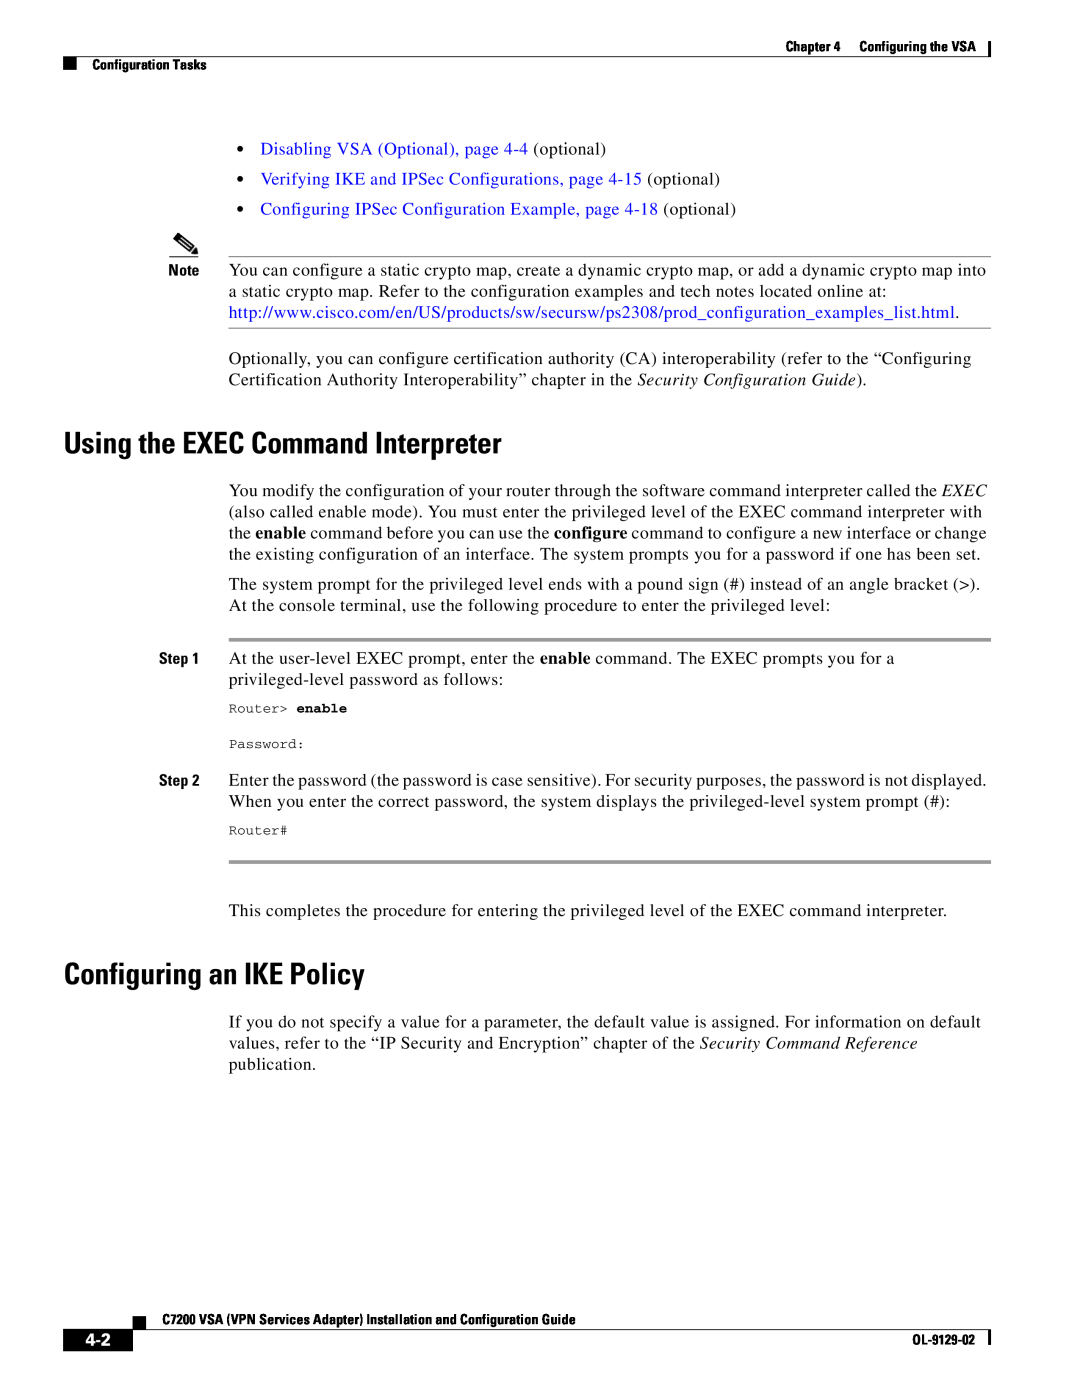 Cisco Systems C7200 manual Using the EXEC Command Interpreter, Configuring an IKE Policy 